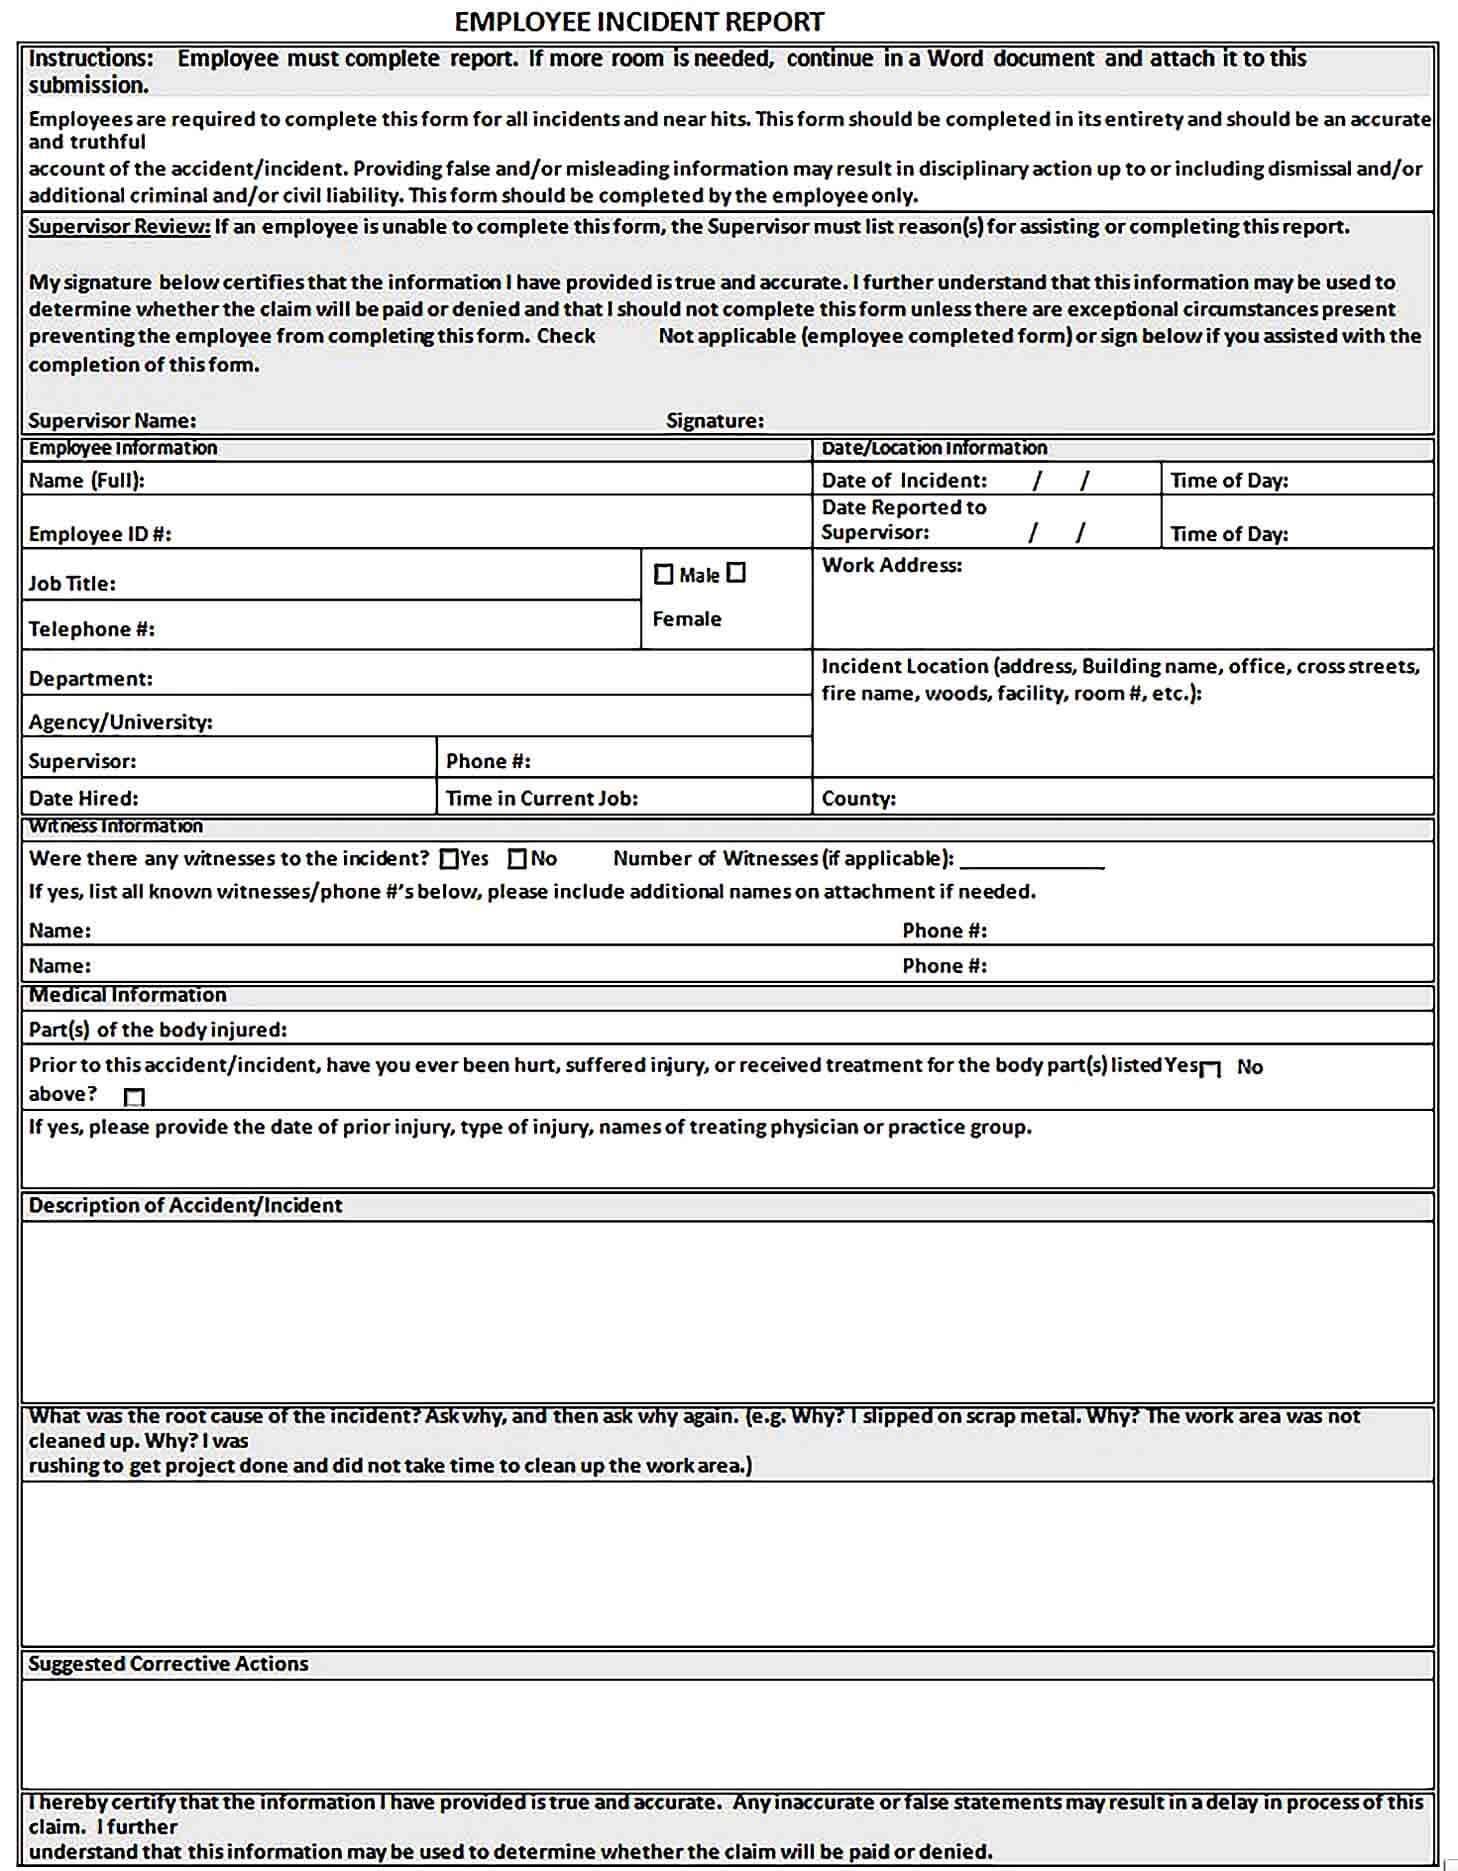 Sample Employee Incident Report Template in PDF